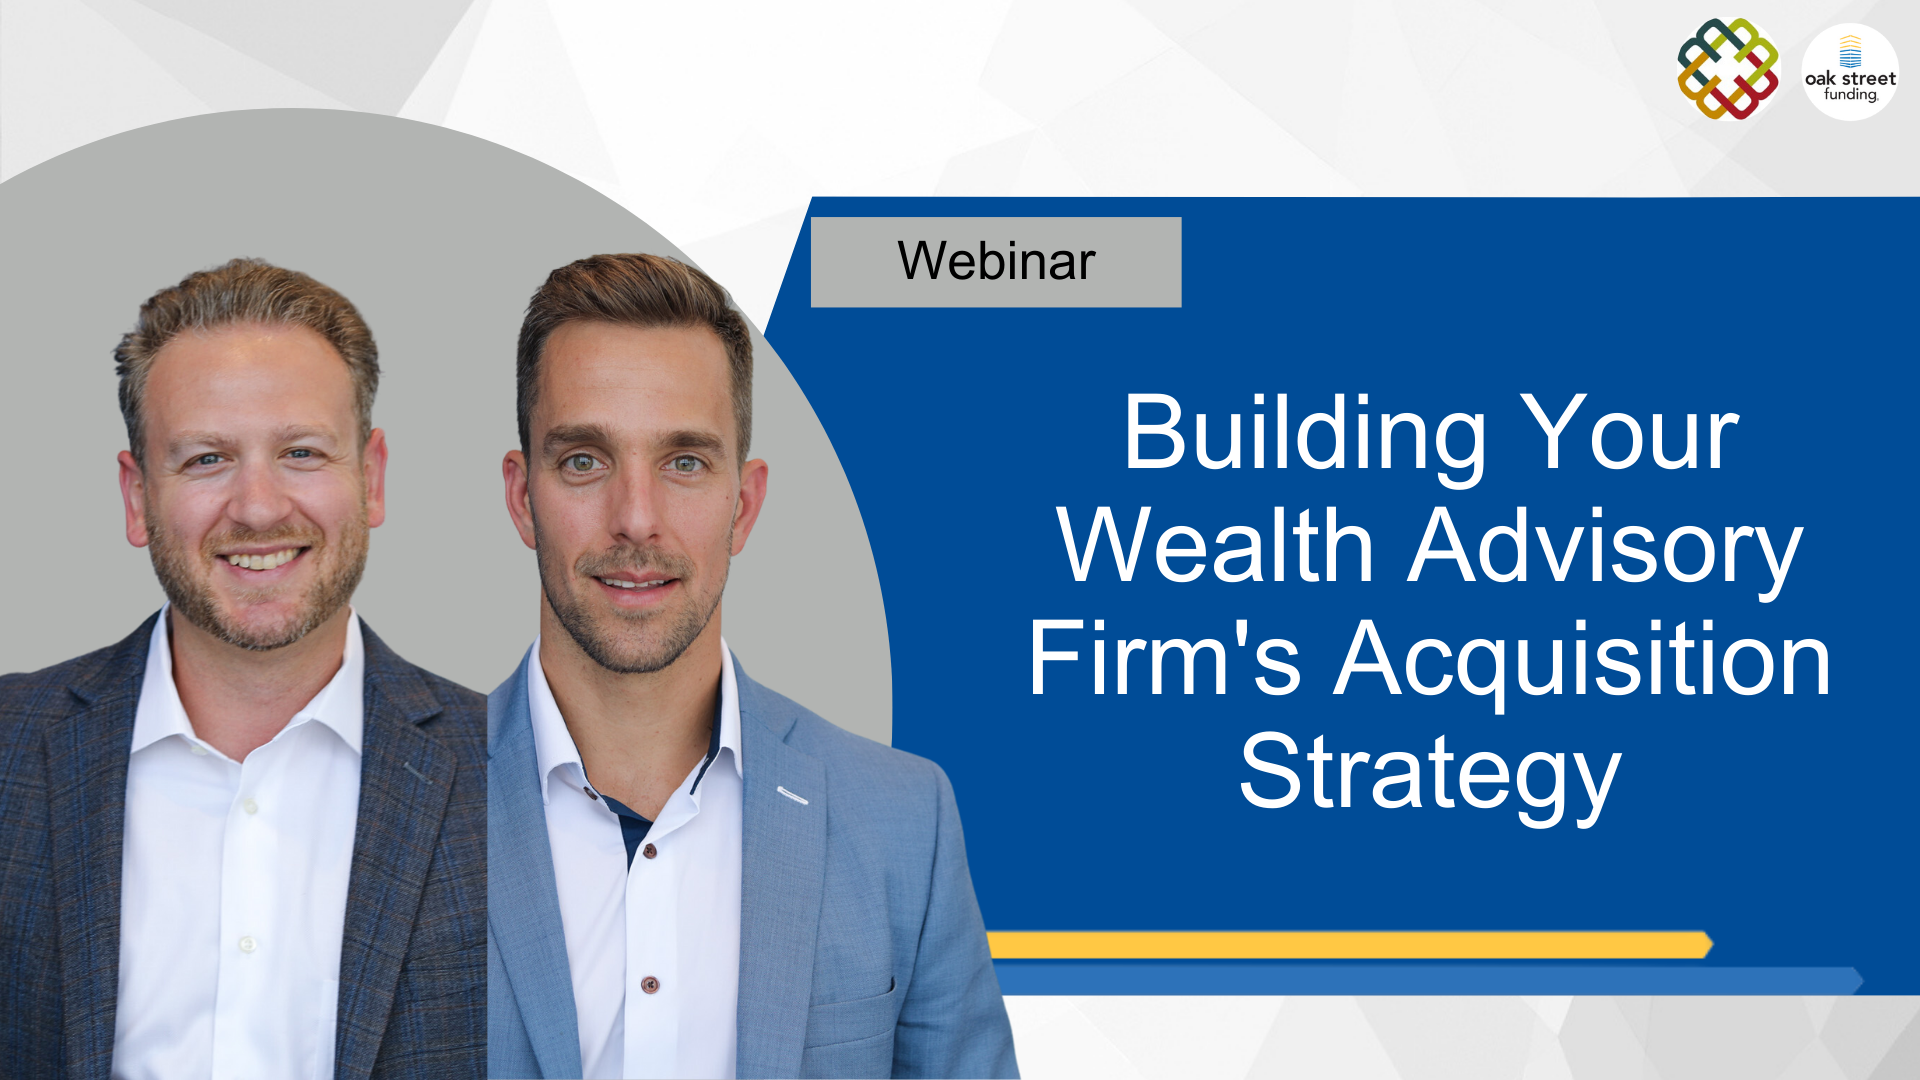 Building Your Wealth Advisory Firm's Acquisition Strategy